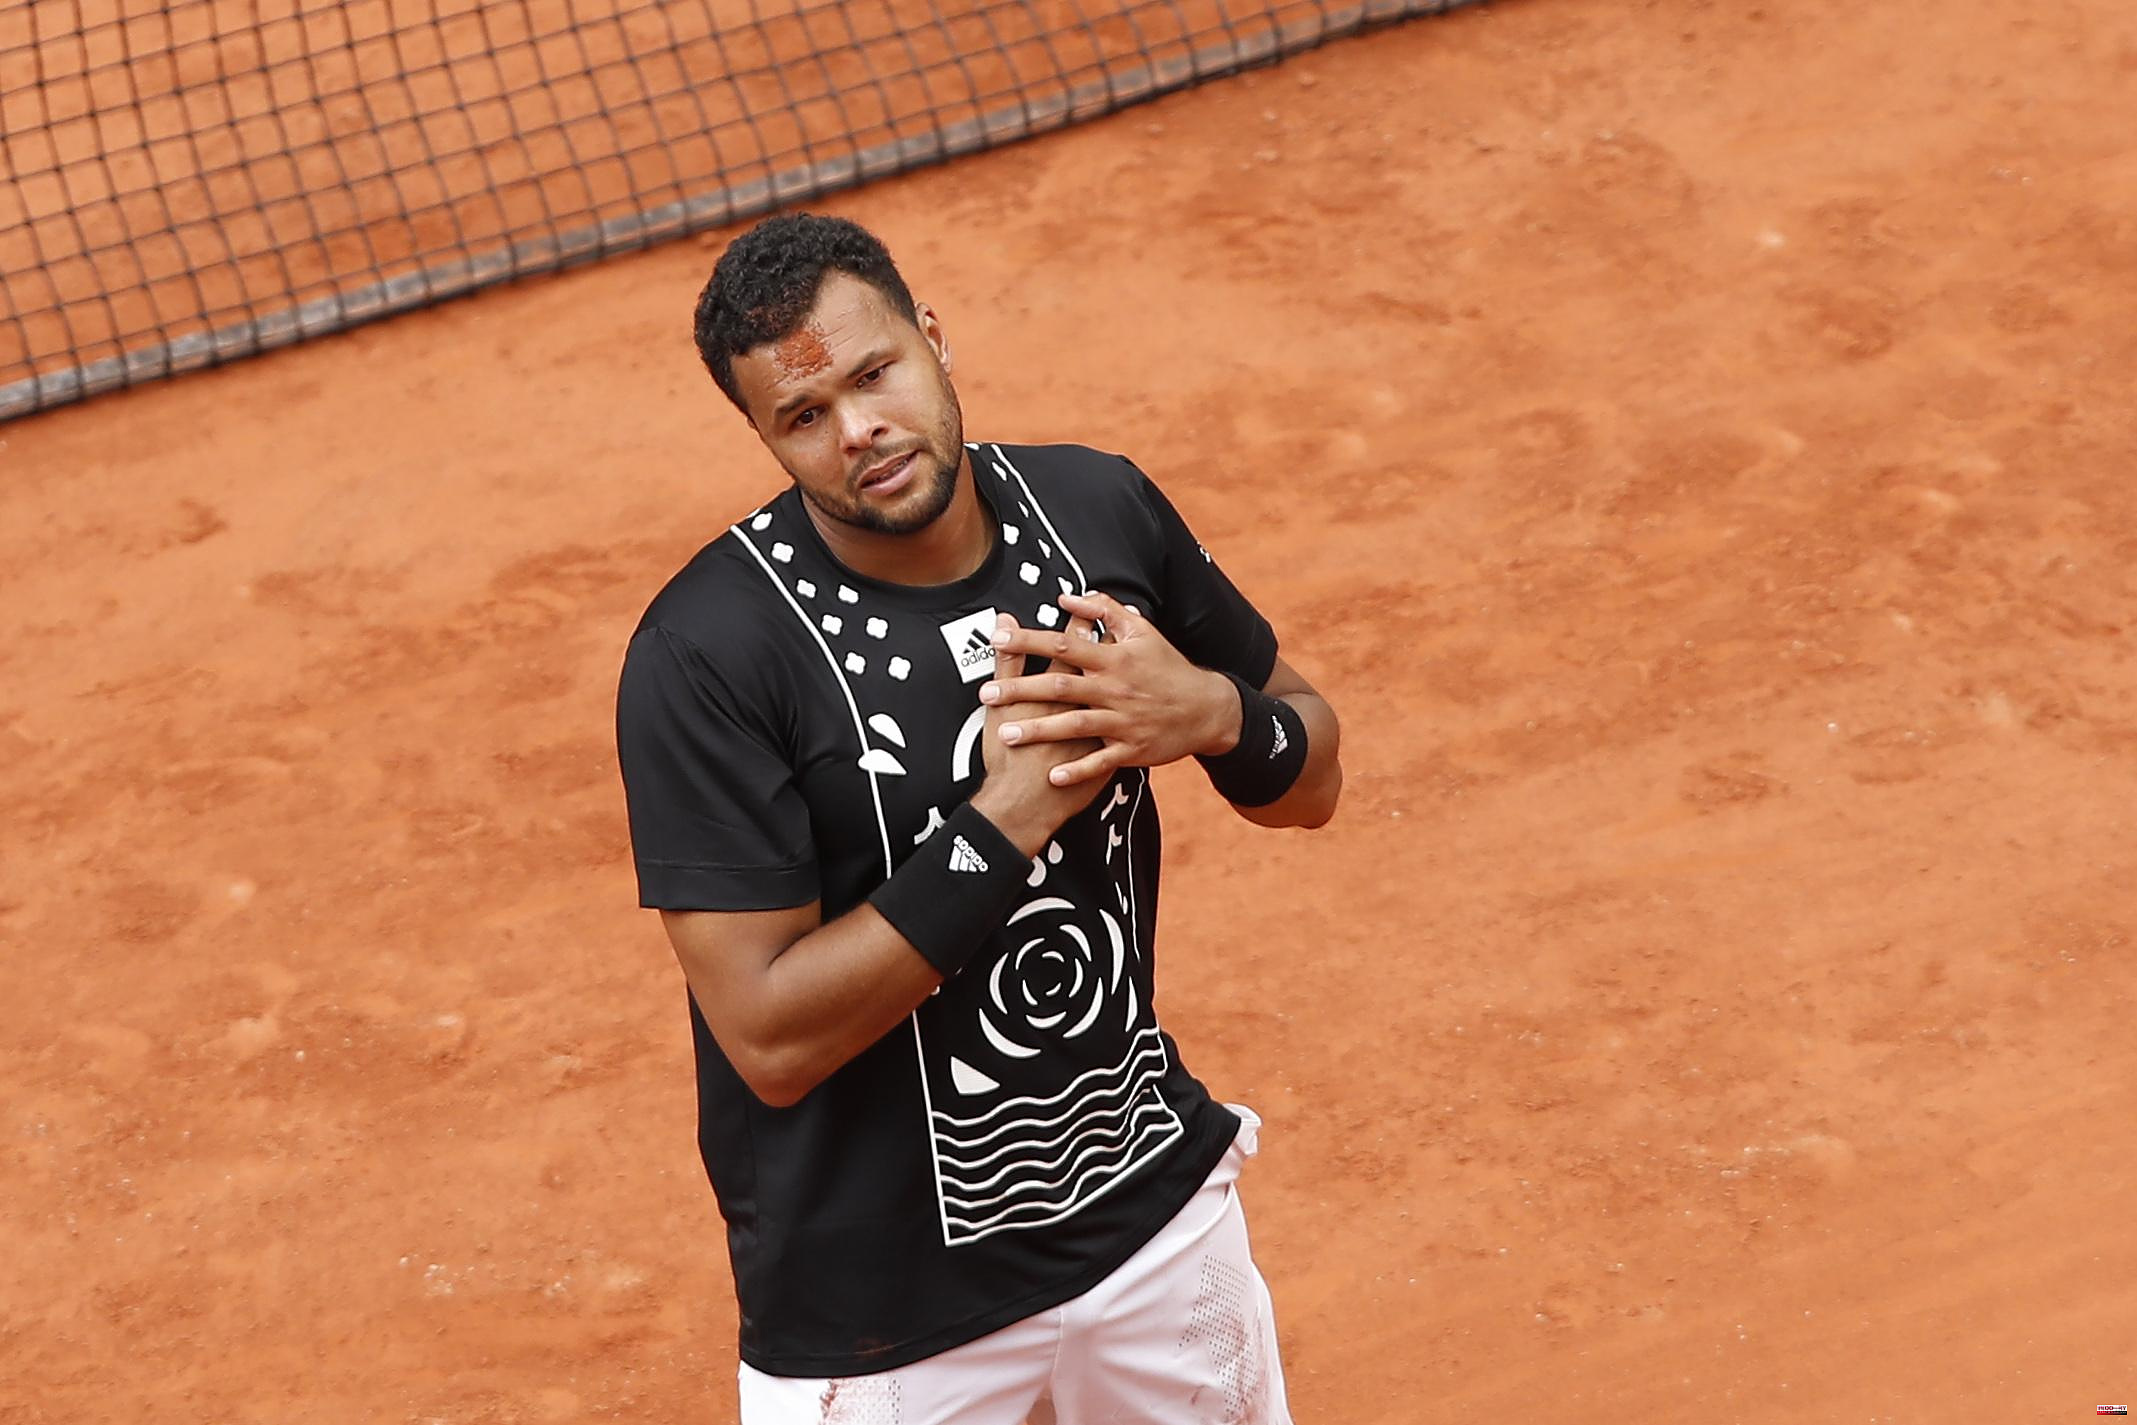 Roland-Garros: in tears, Tsonga applauded by all of Philippe-Chatrier (video)